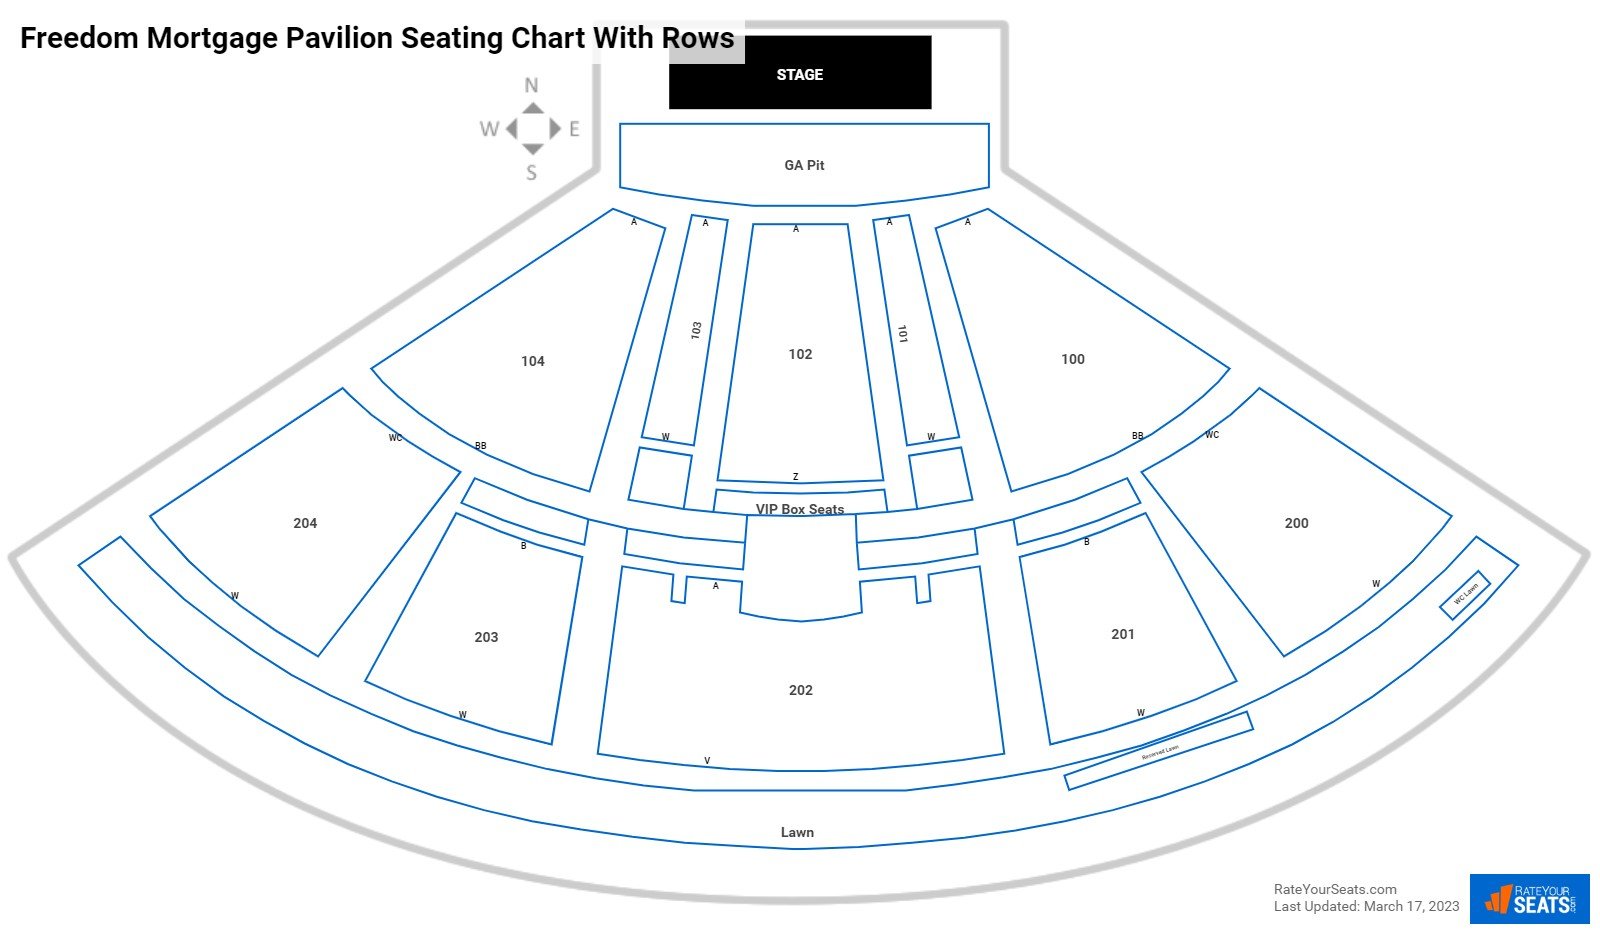 Freedom Mortgage Pavilion seating chart with row numbers